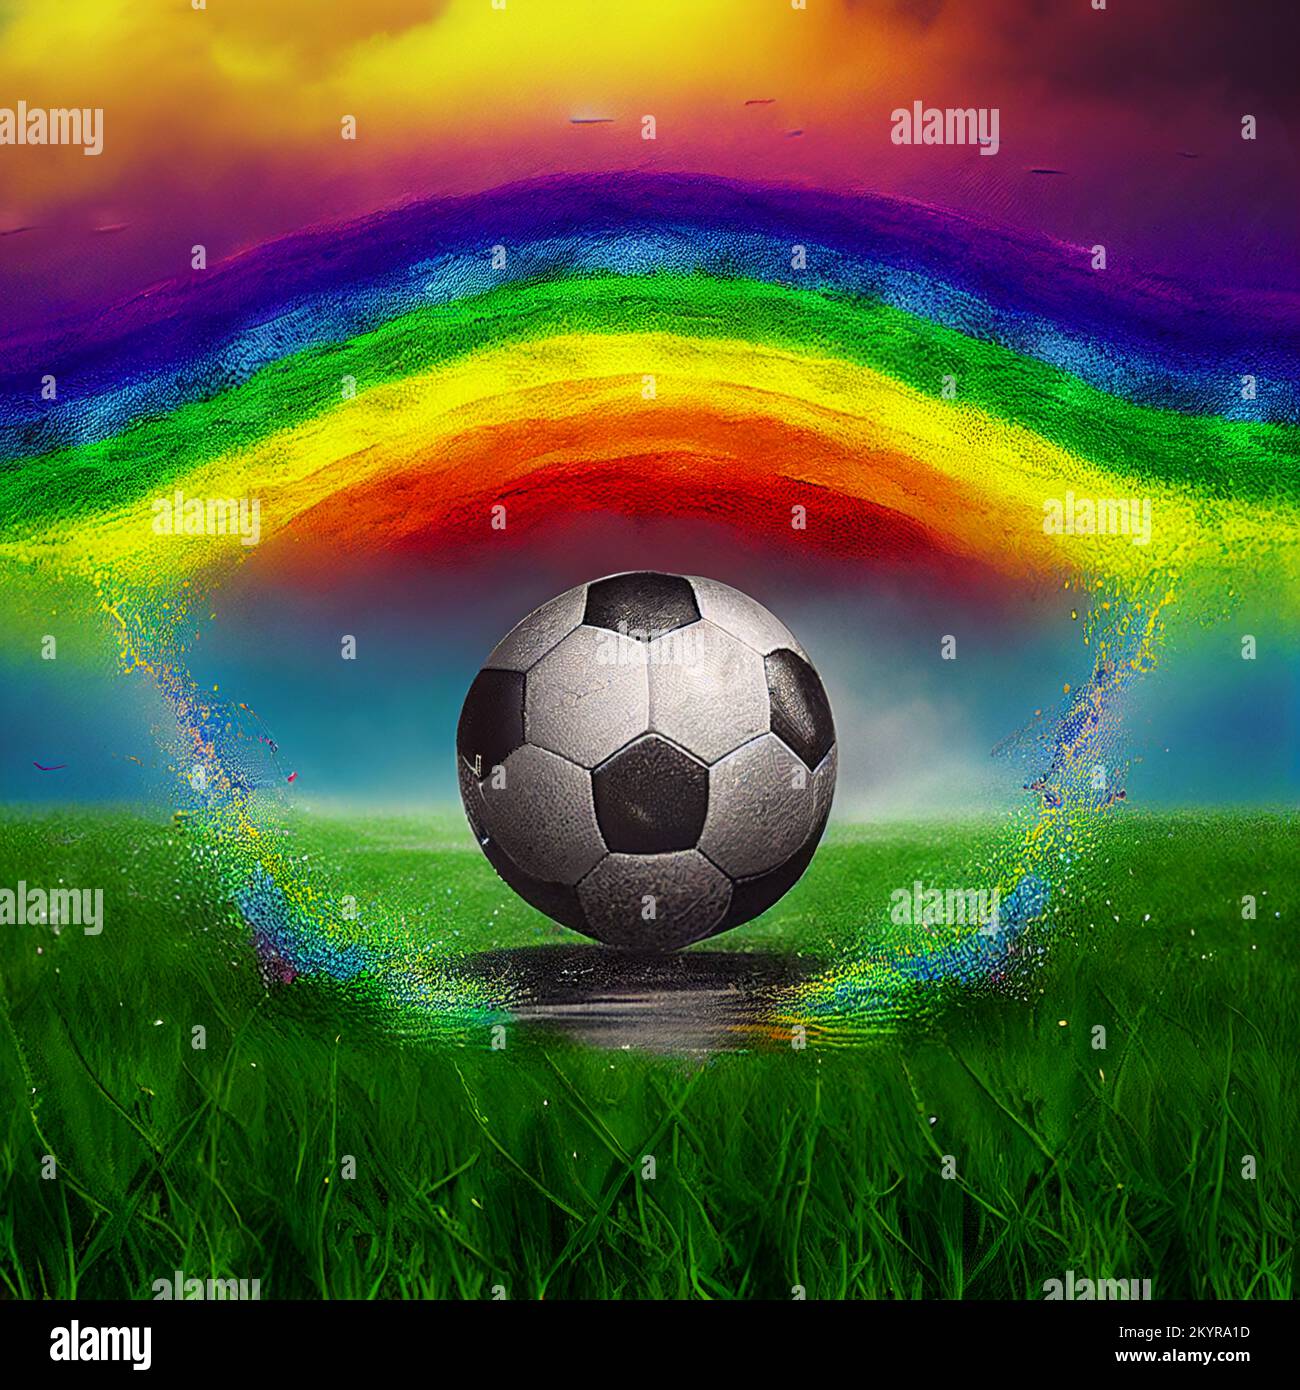 Football / Soccer illustration, celebrating the World Cup, rainbow colors Stock Photo